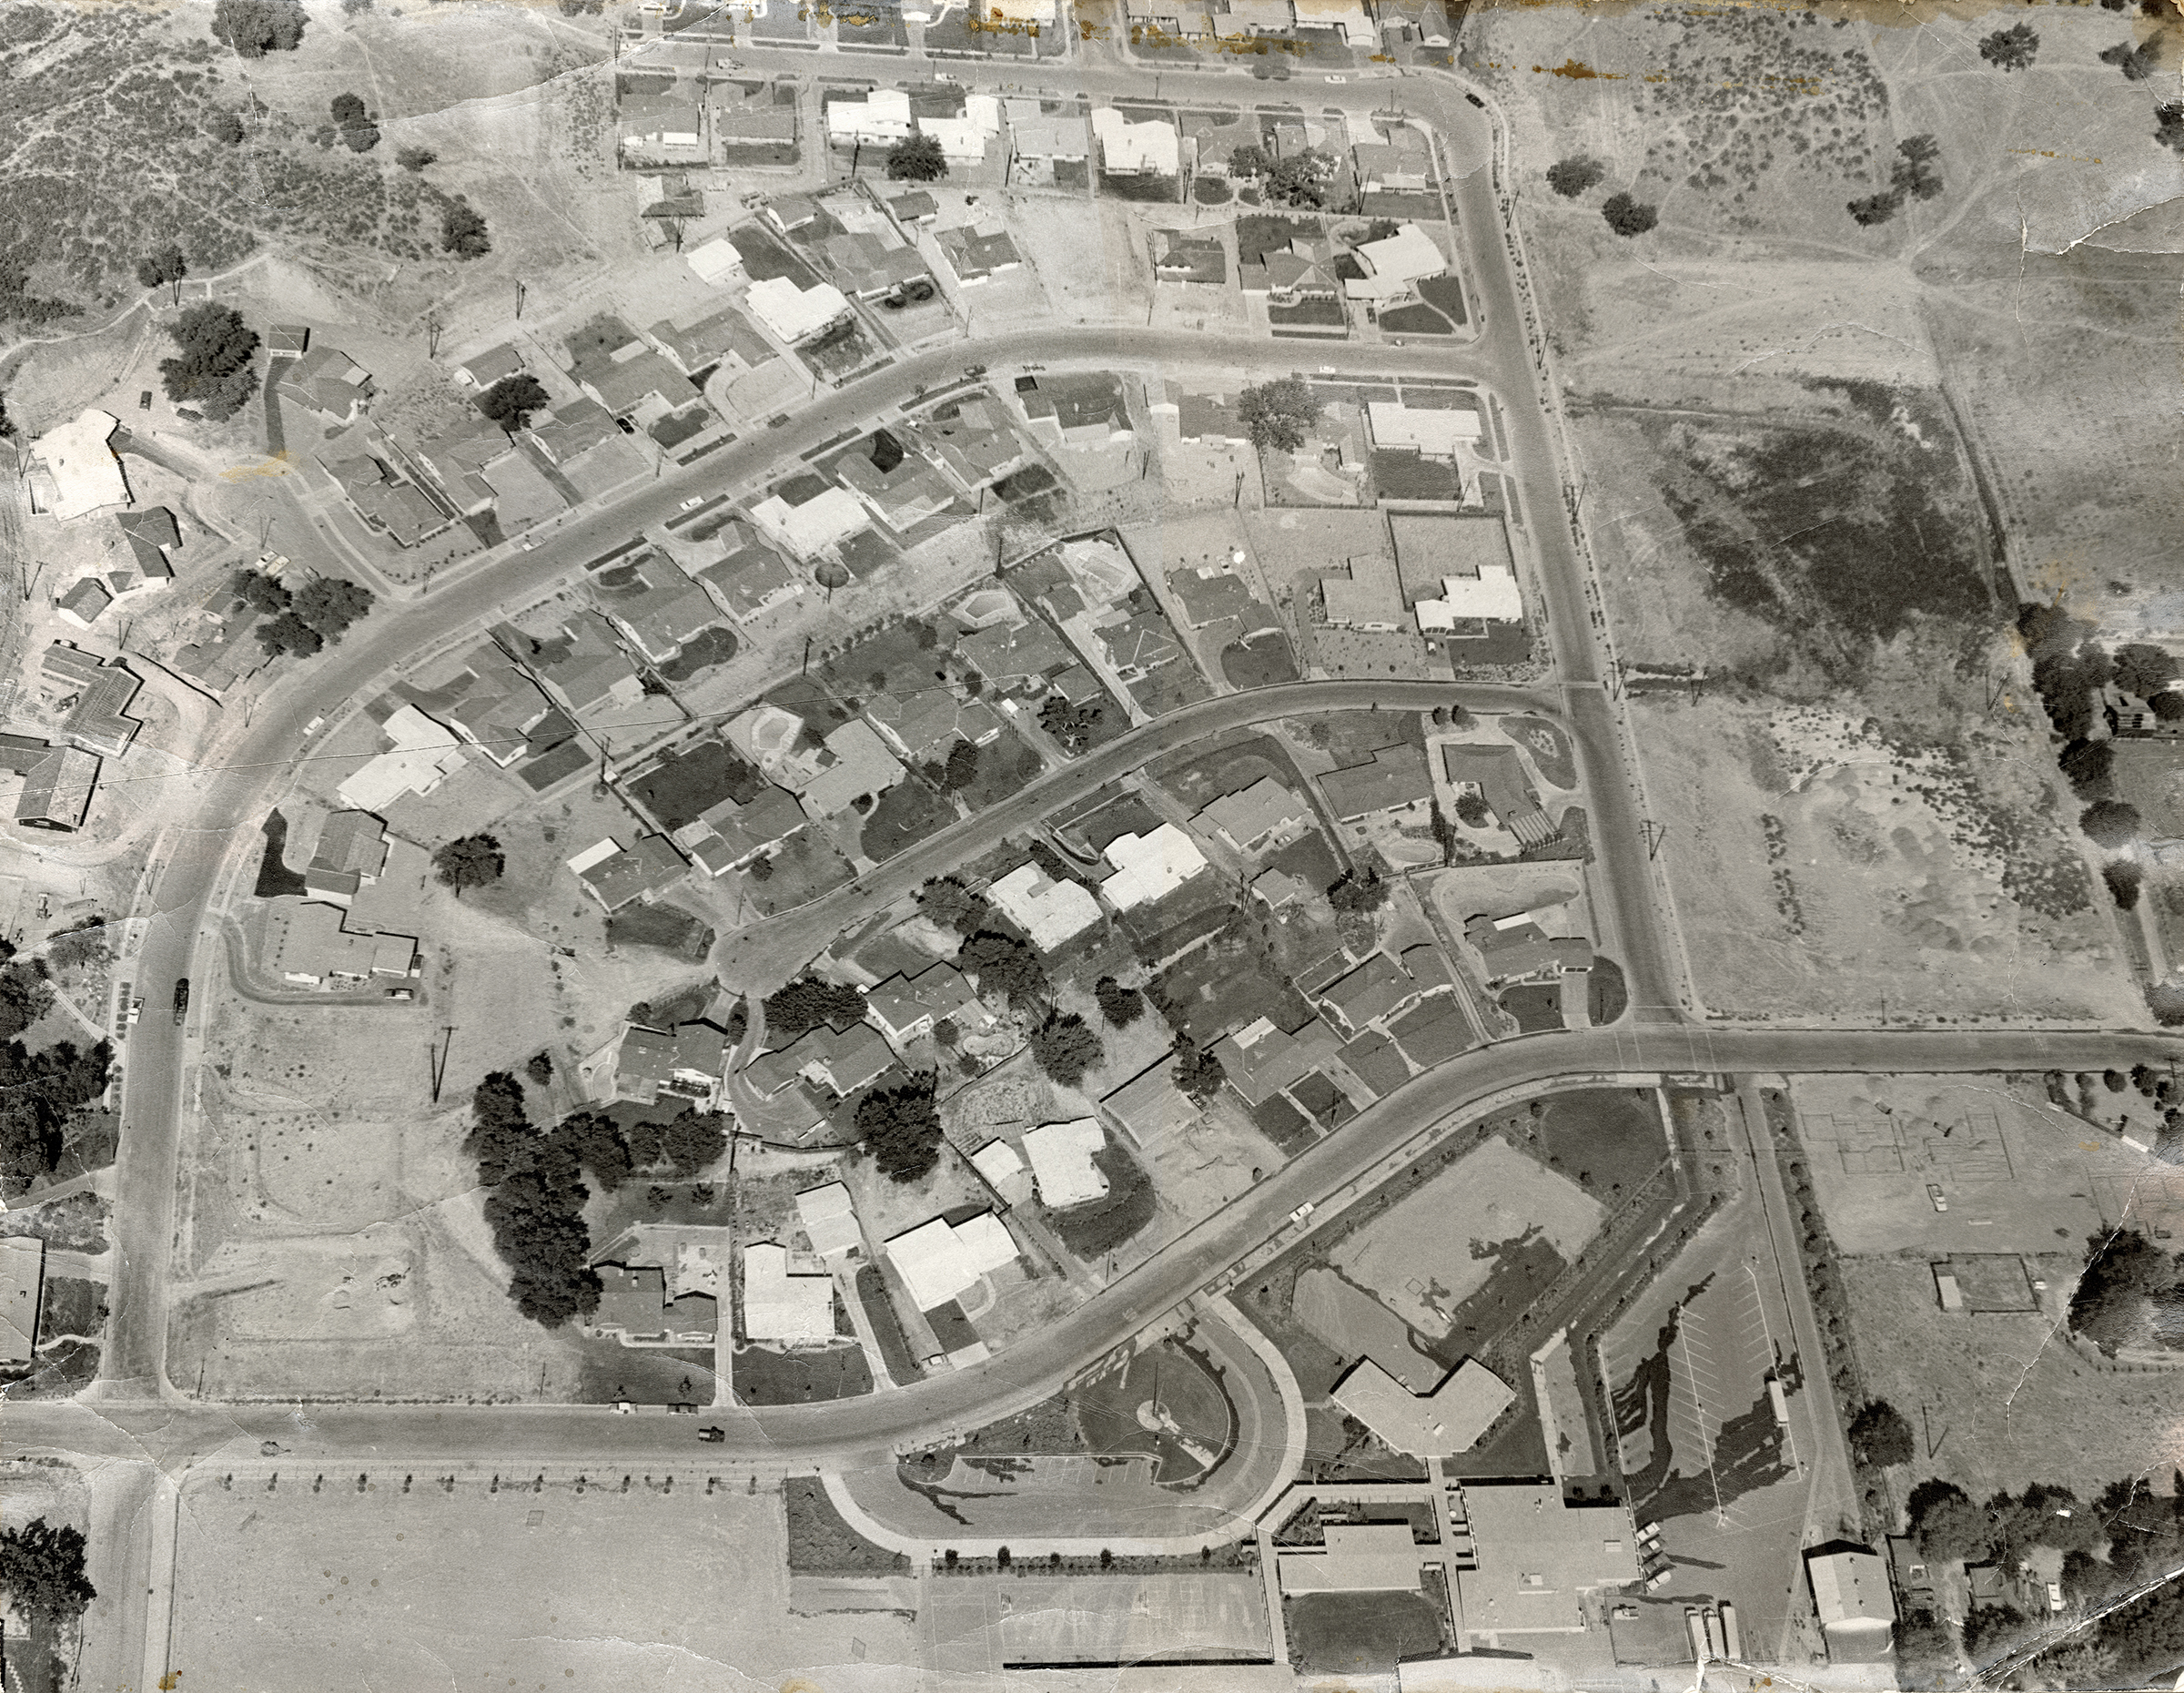 Scvhistory Com Tl6401 Newhall Peachland Area Of Happy Valley Development Aerial View 1964